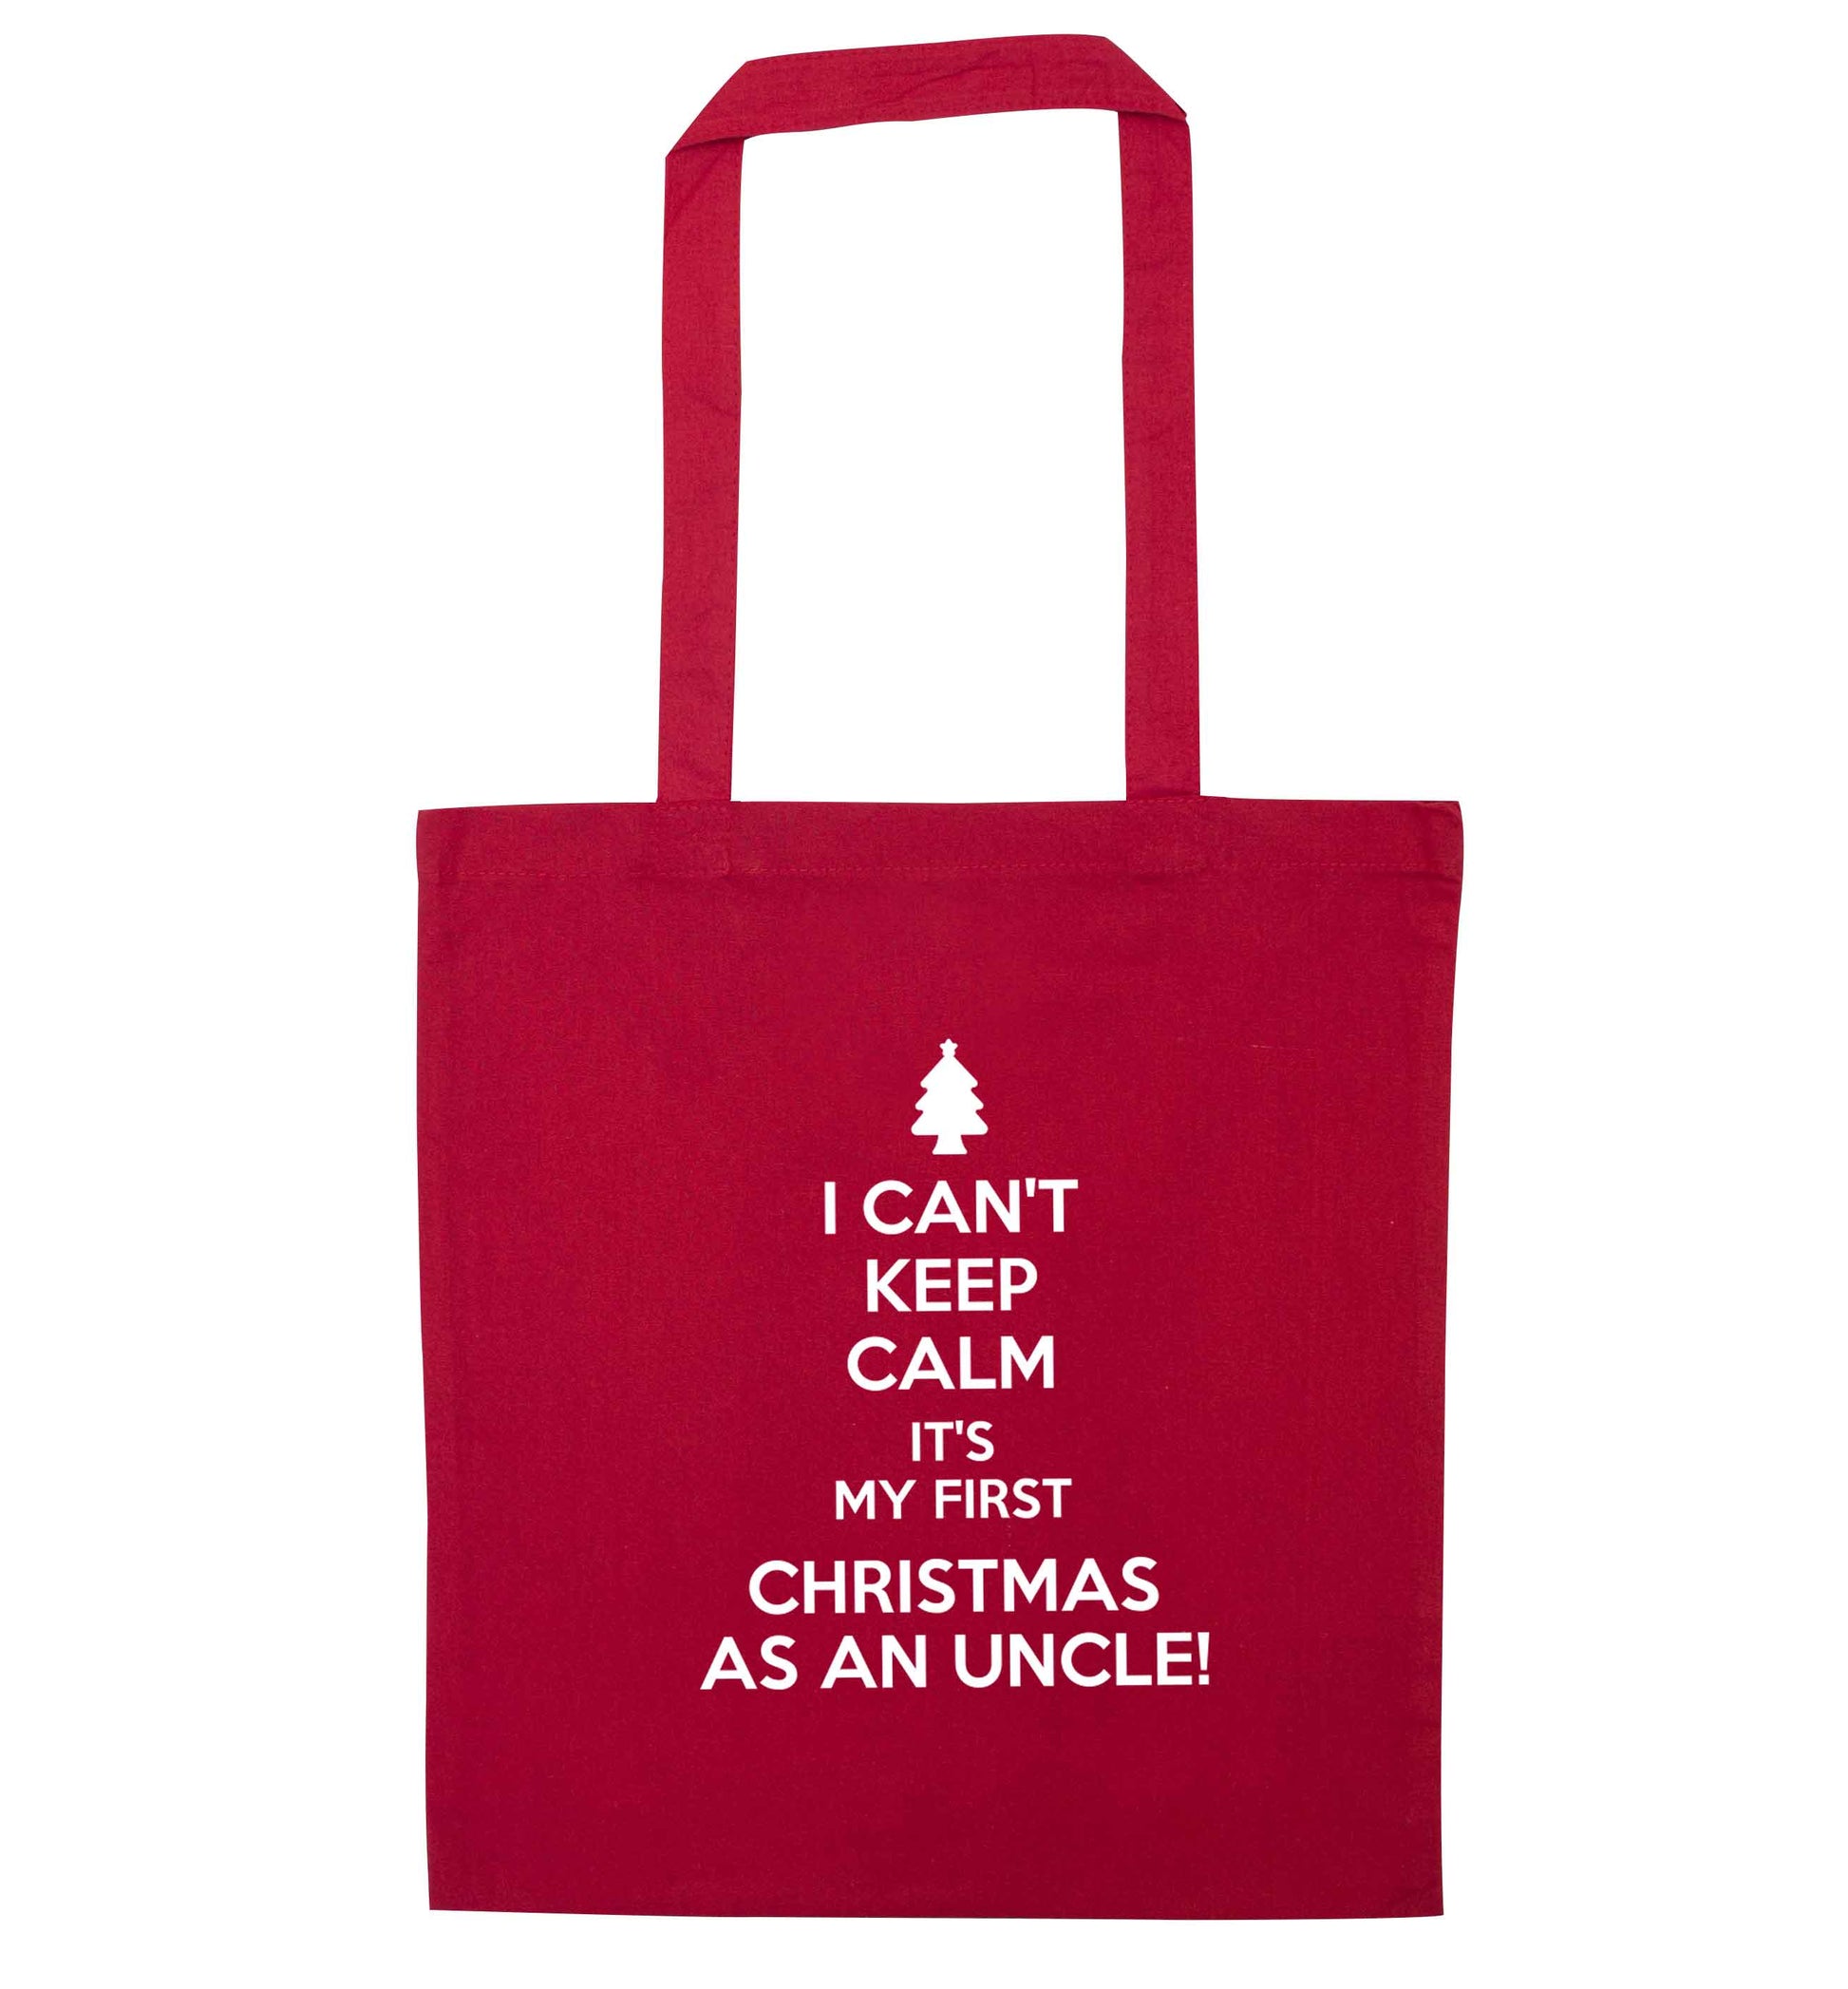 I can't keep calm it's my first Christmas as an uncle! red tote bag